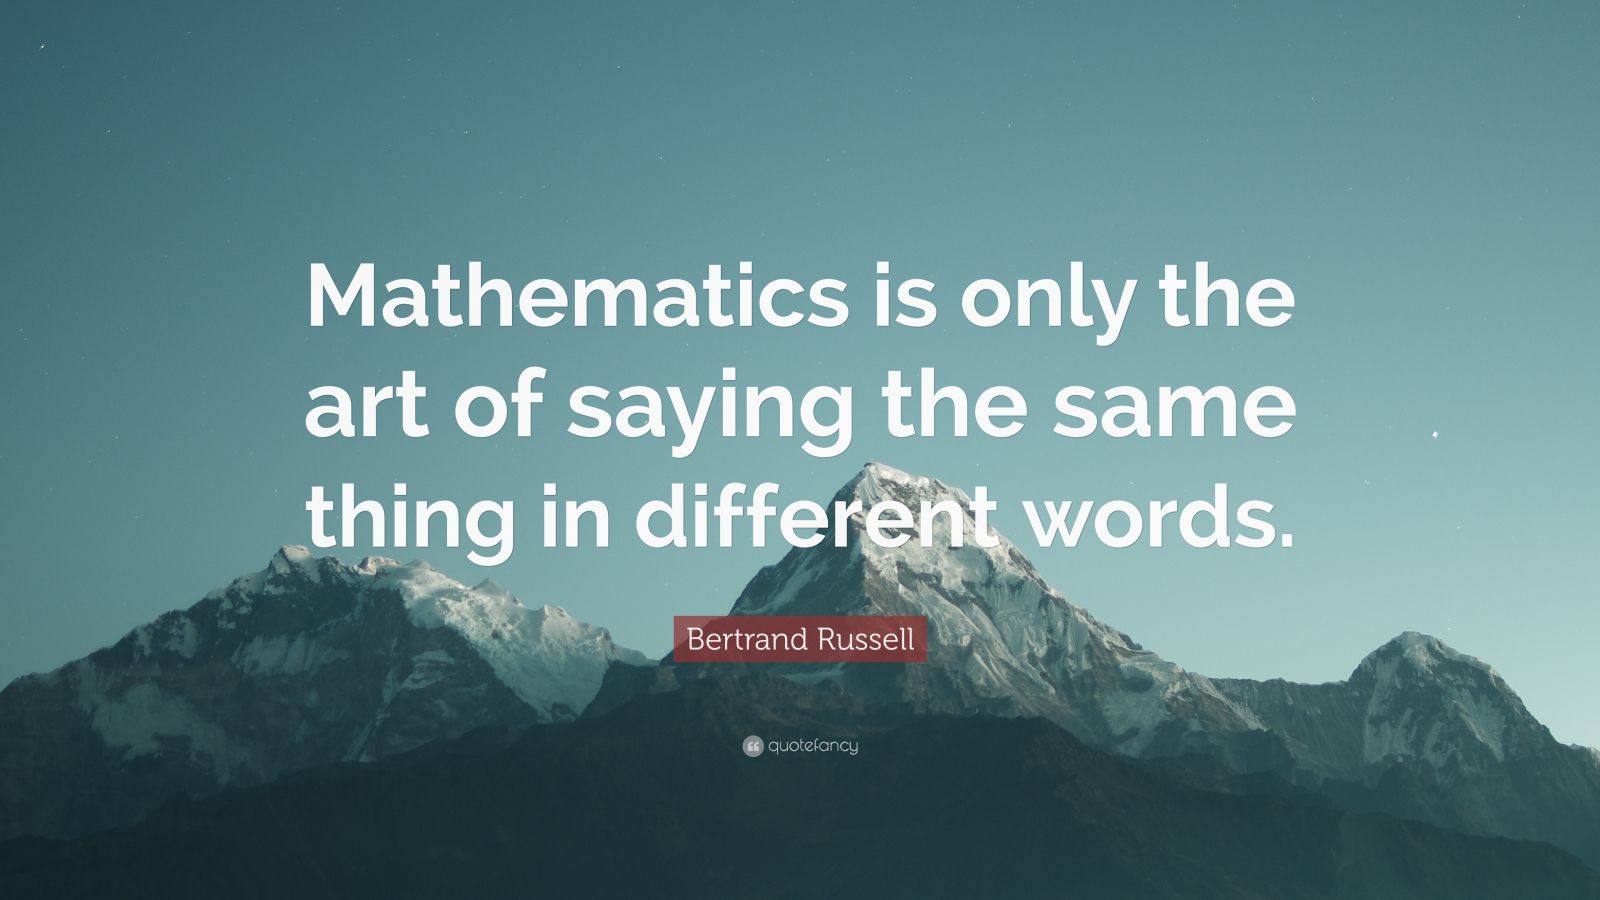 bertrand-russell-quote-mathematics-is-only-the-art-of-saying-the-same-thing-in-different-words